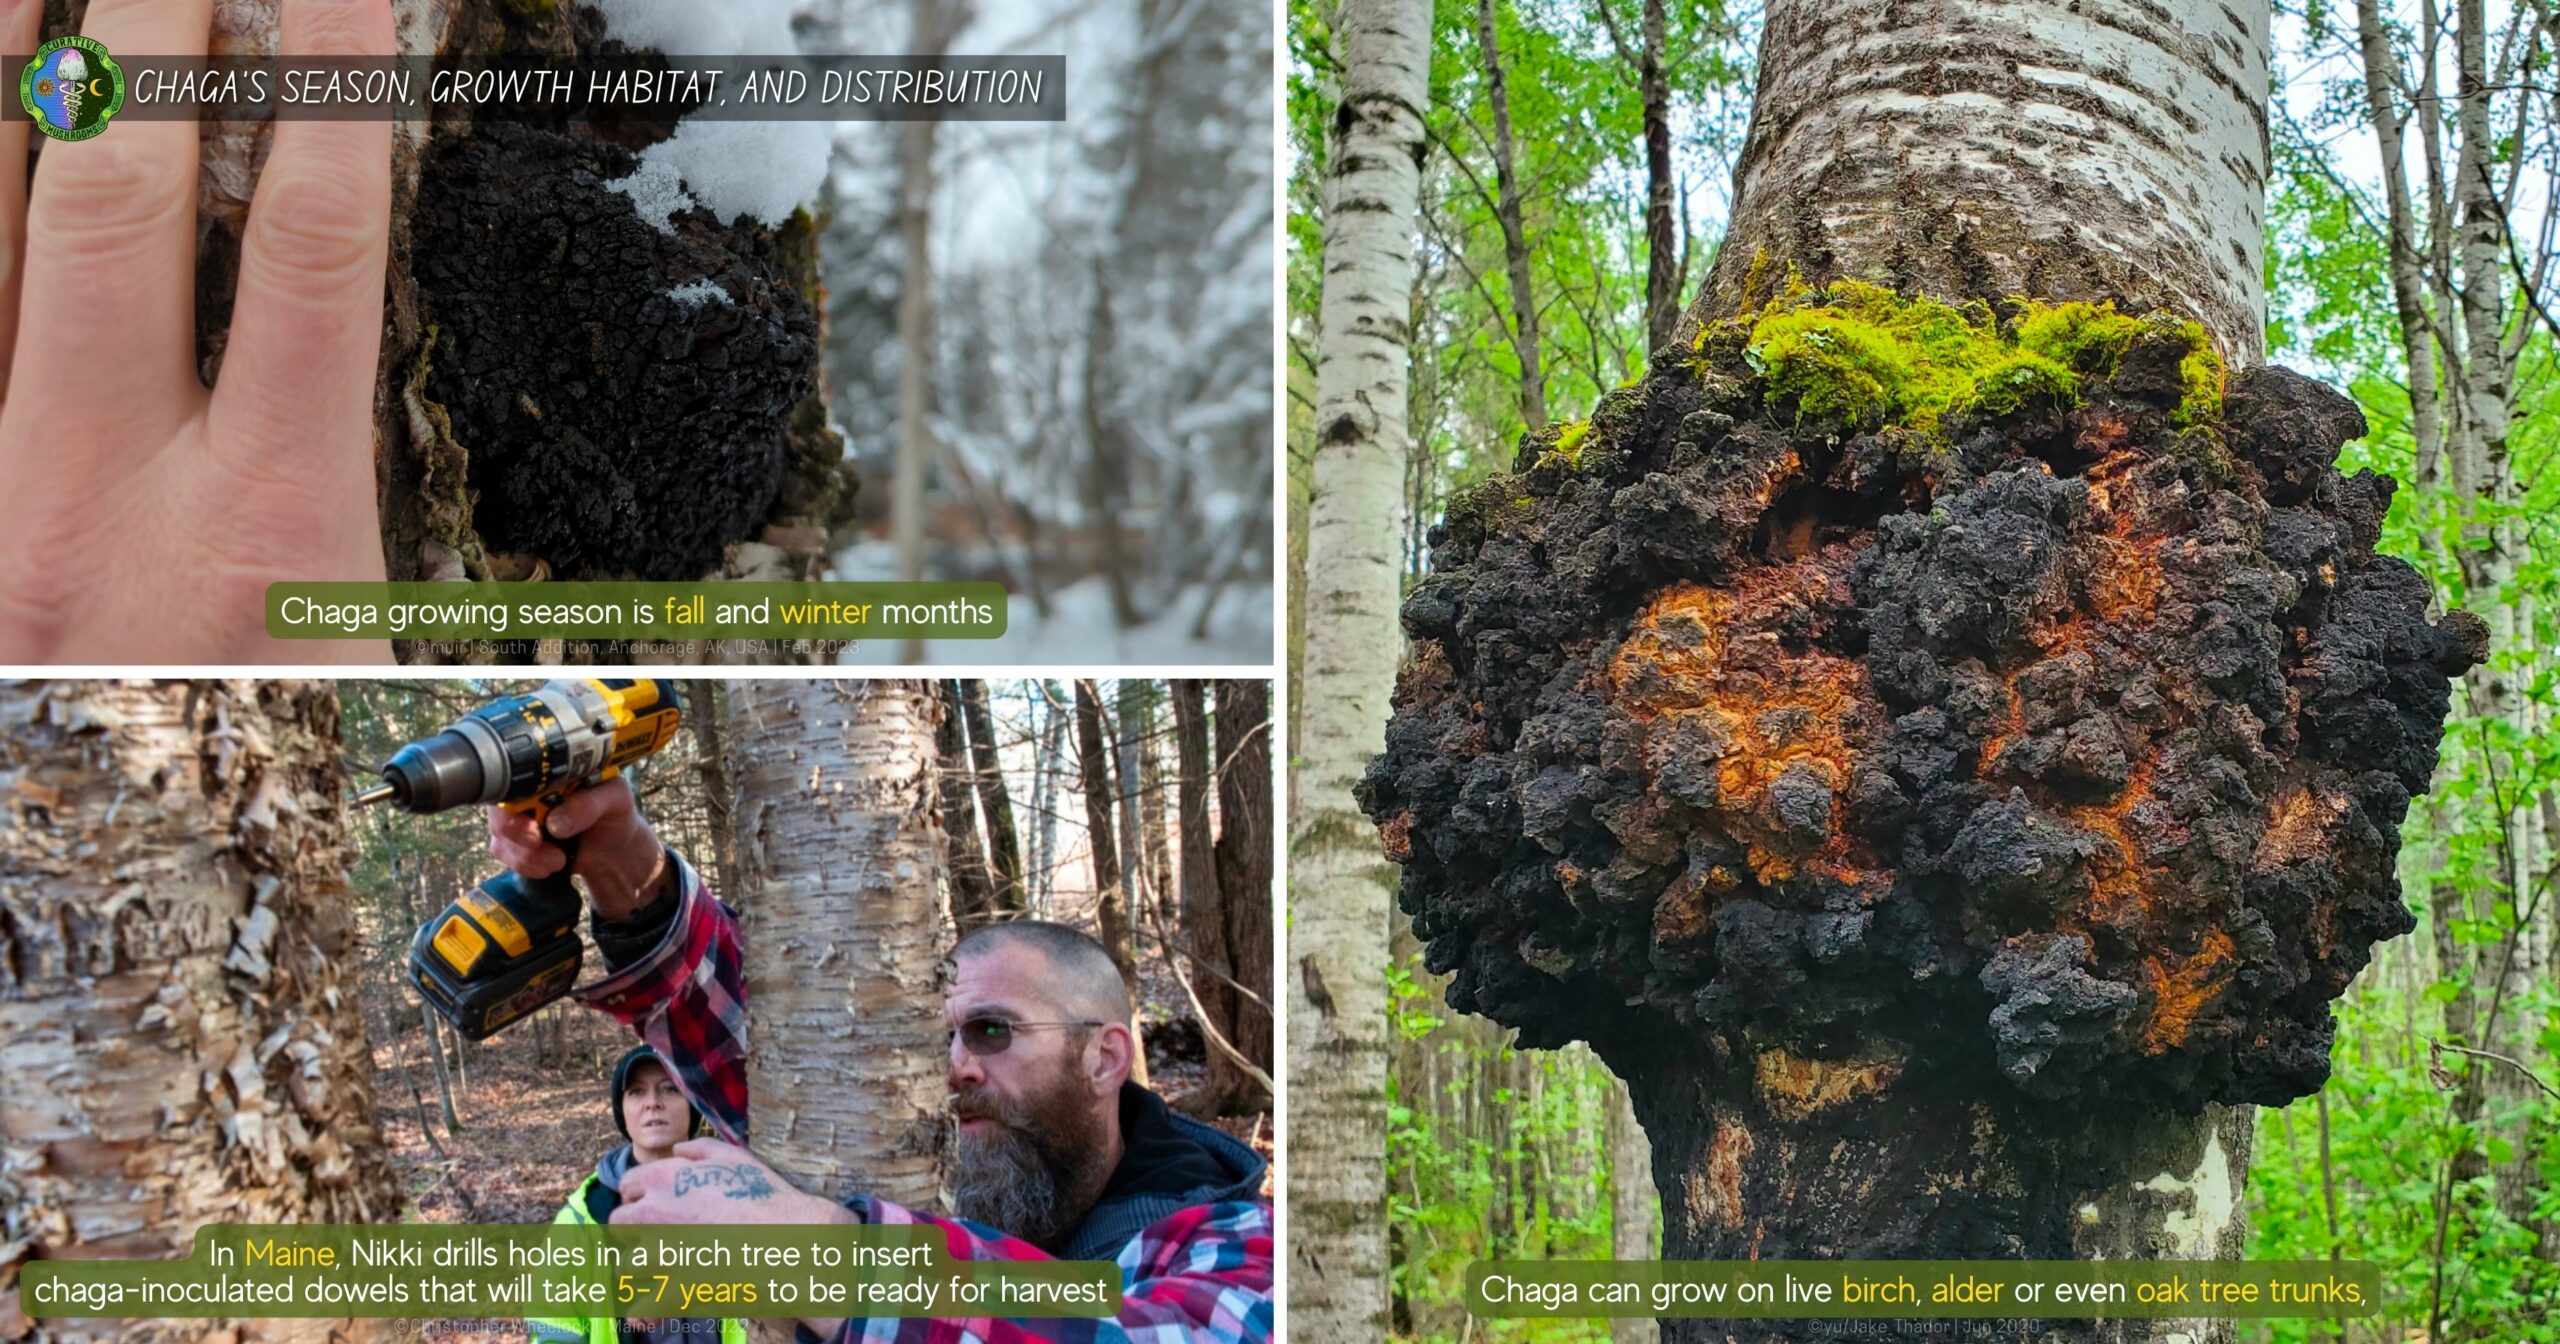 Season, Growth Habitat, and Distribution of Chaga Mushroom - fall winter, live birch trees, northern hemisphere - Russia, Europe, North America - cultivated in Asia and Maine